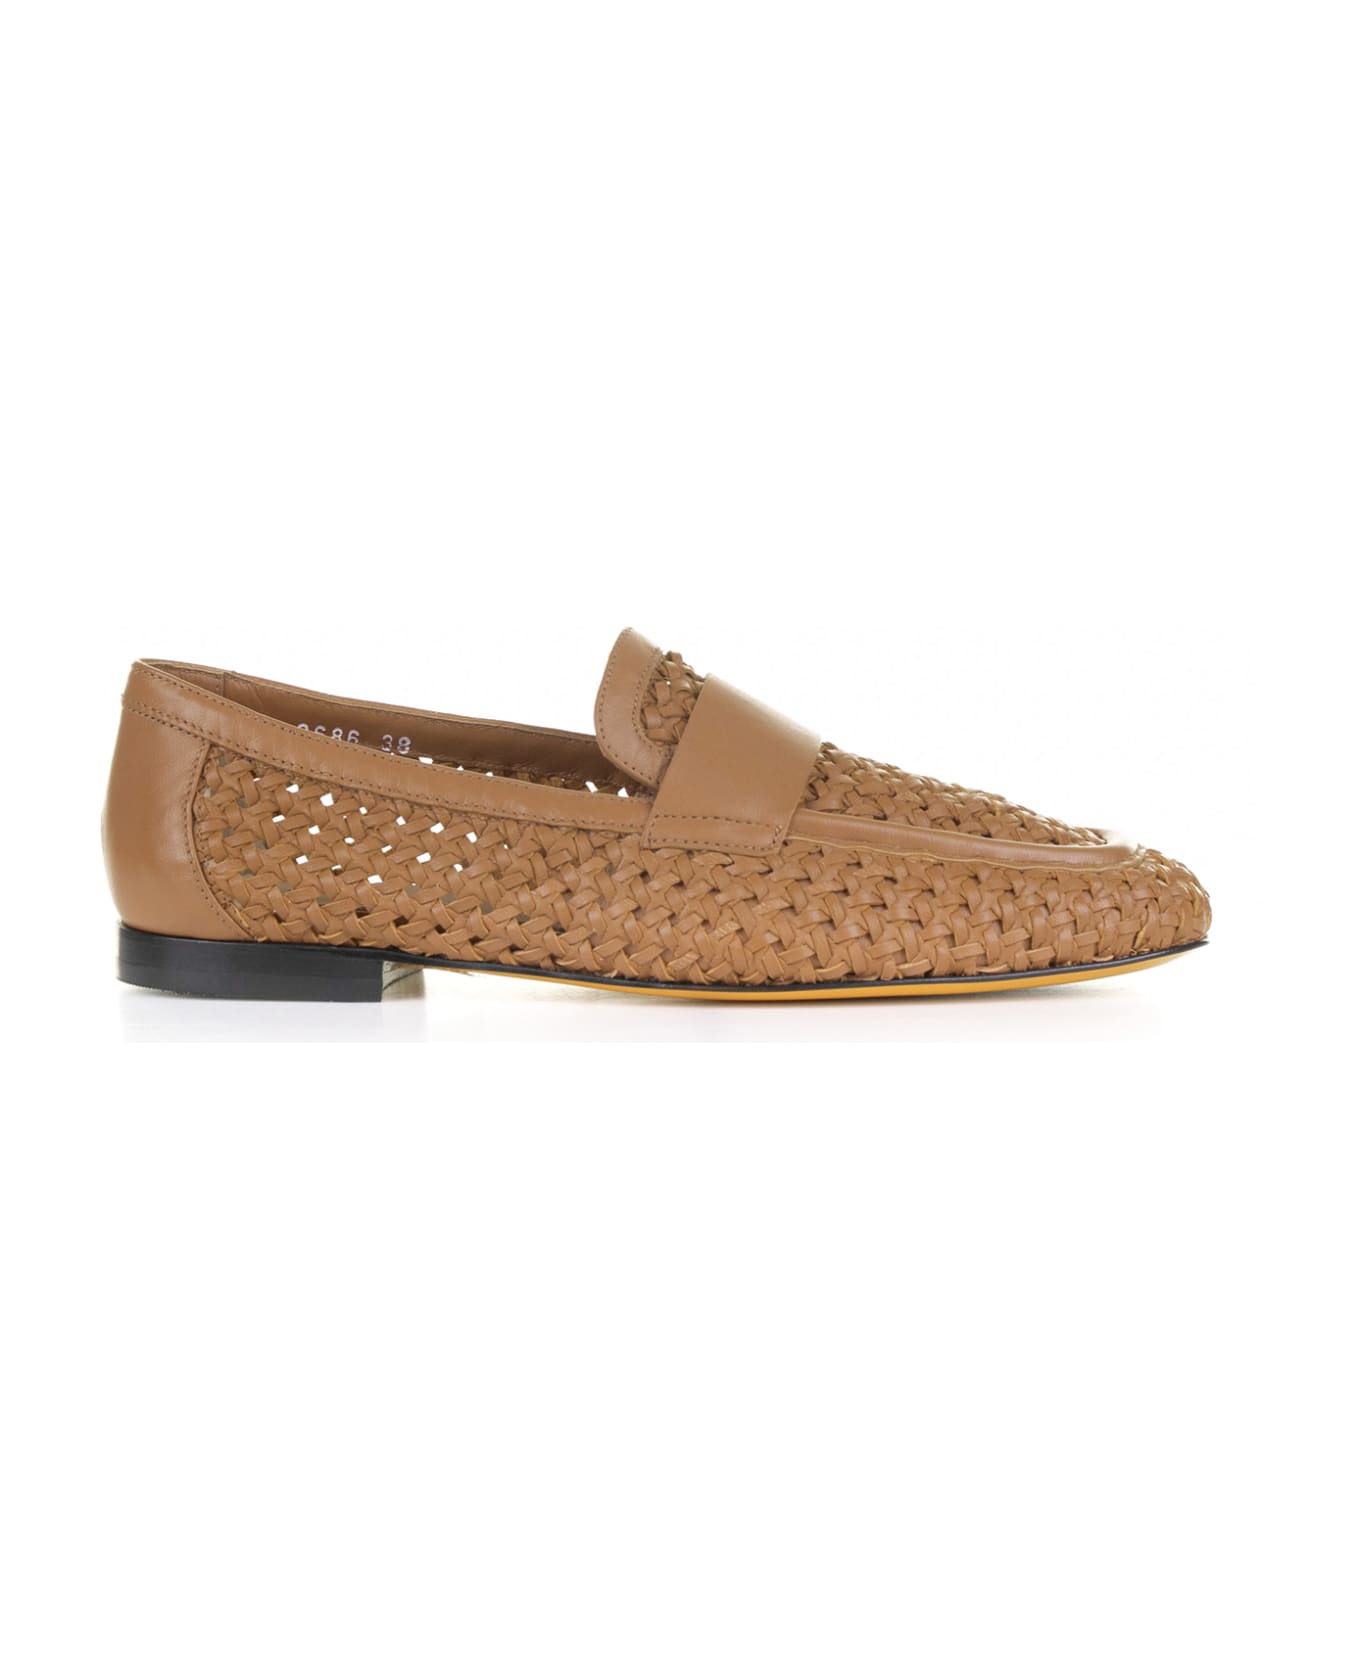 Doucal's Woven Leather Moccasin - NOCE